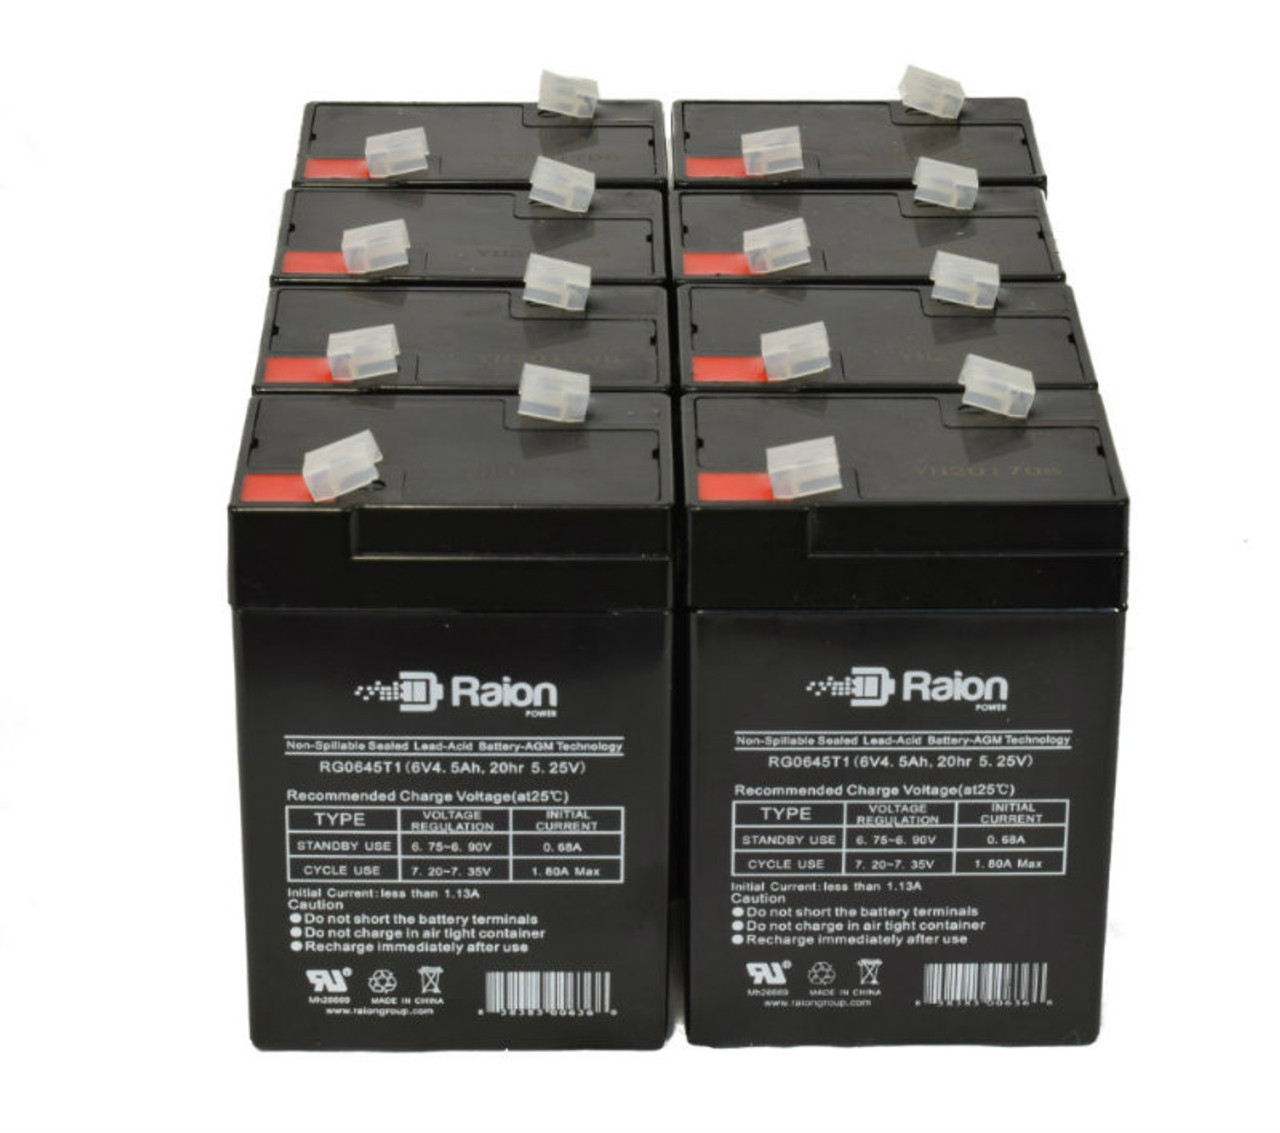 Raion Power RG0645T1 6V 4.5Ah Replacement Medical Equipment Battery for American Hospital Supply Microrate Infusion Pump - 8 Pack